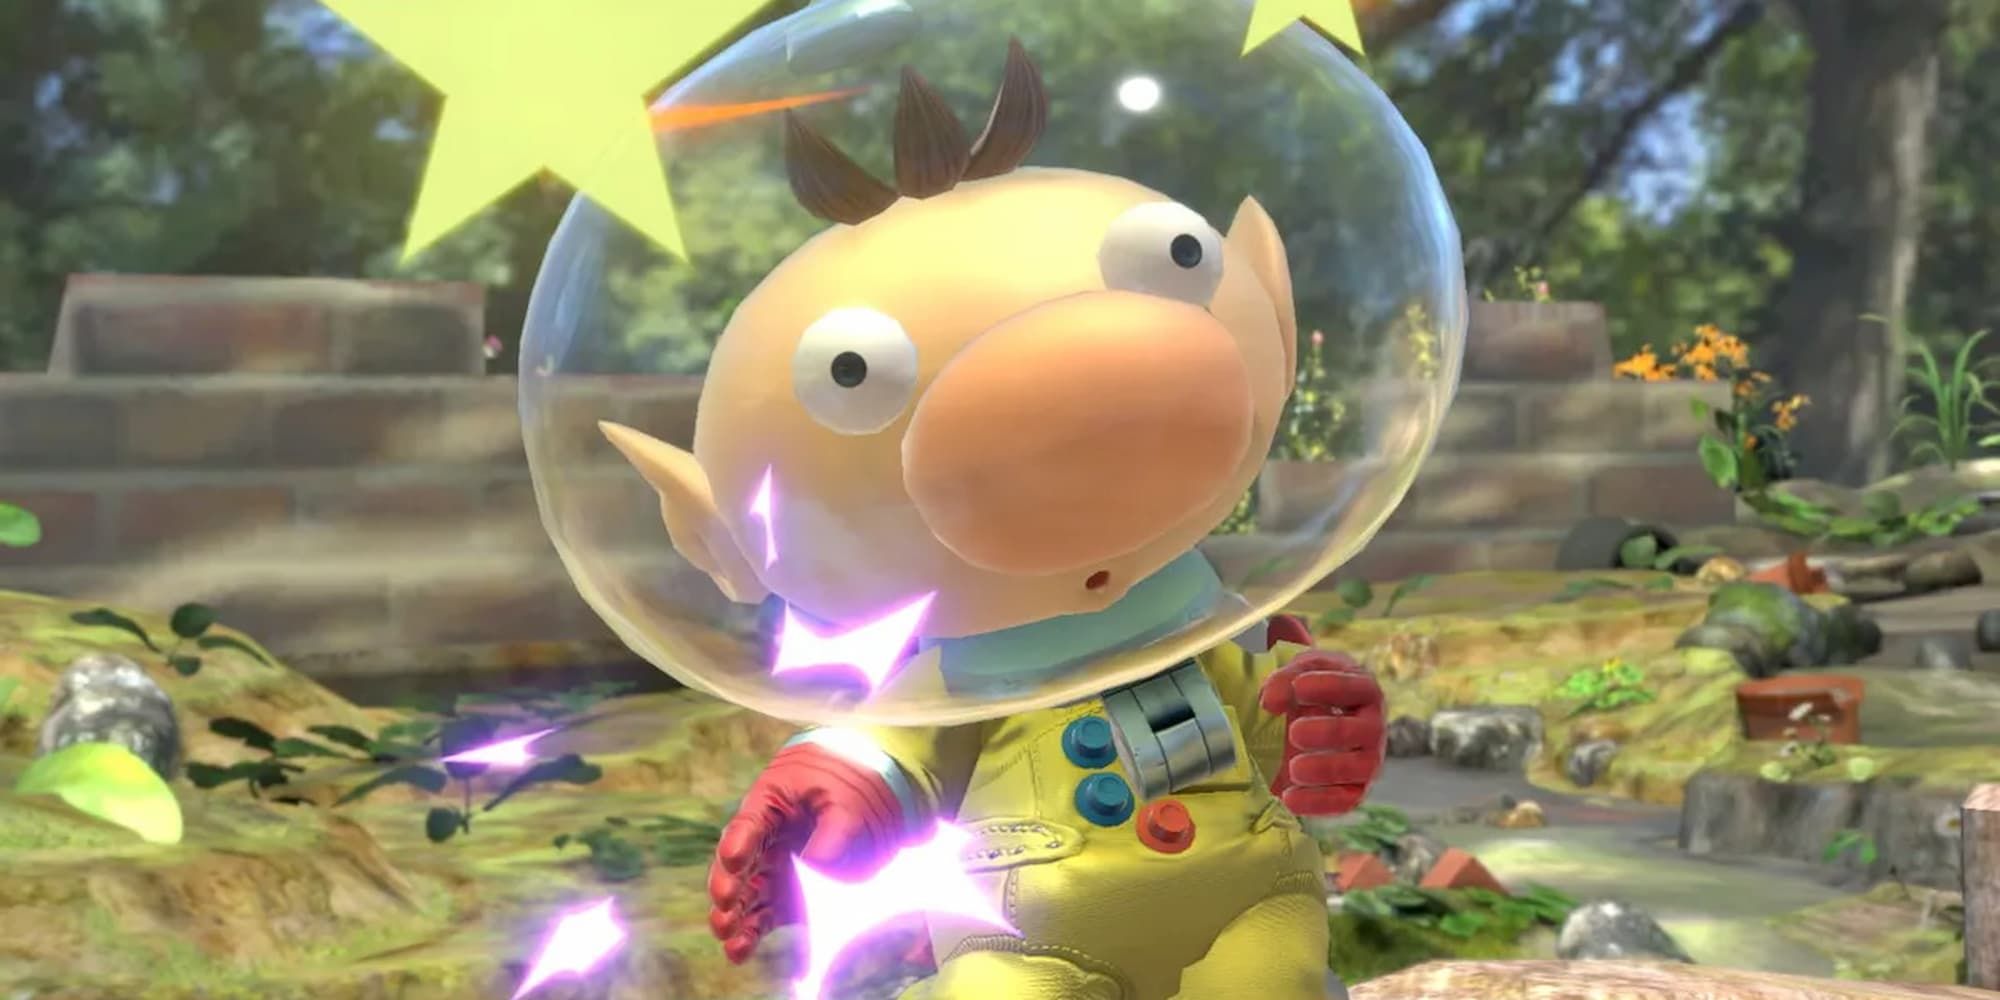 Captain Olimar's eyes widen after being stunned in Pikman.